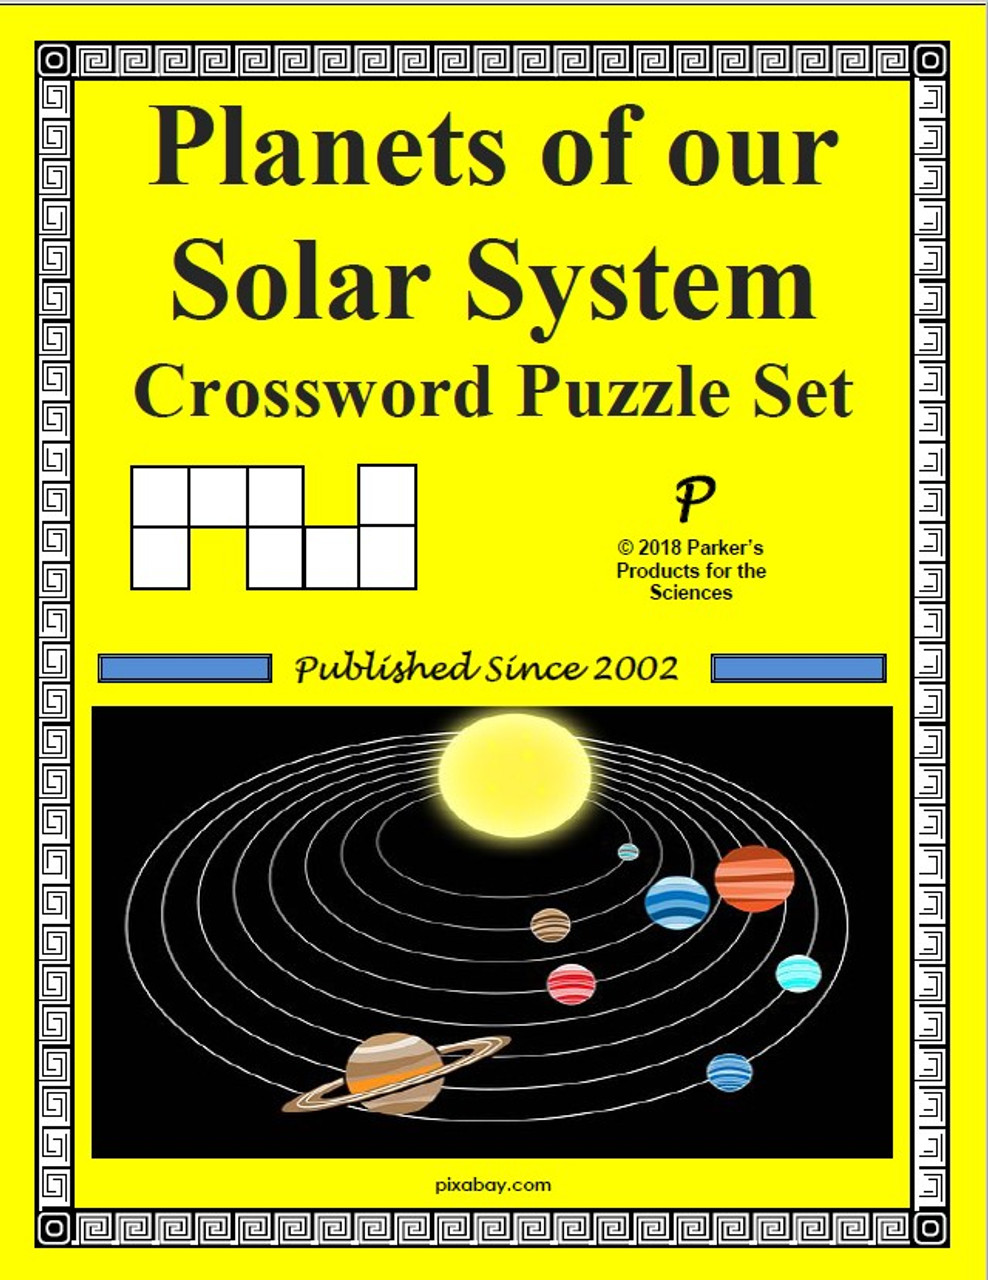 Planets of our Solar System Crossword Puzzle Set